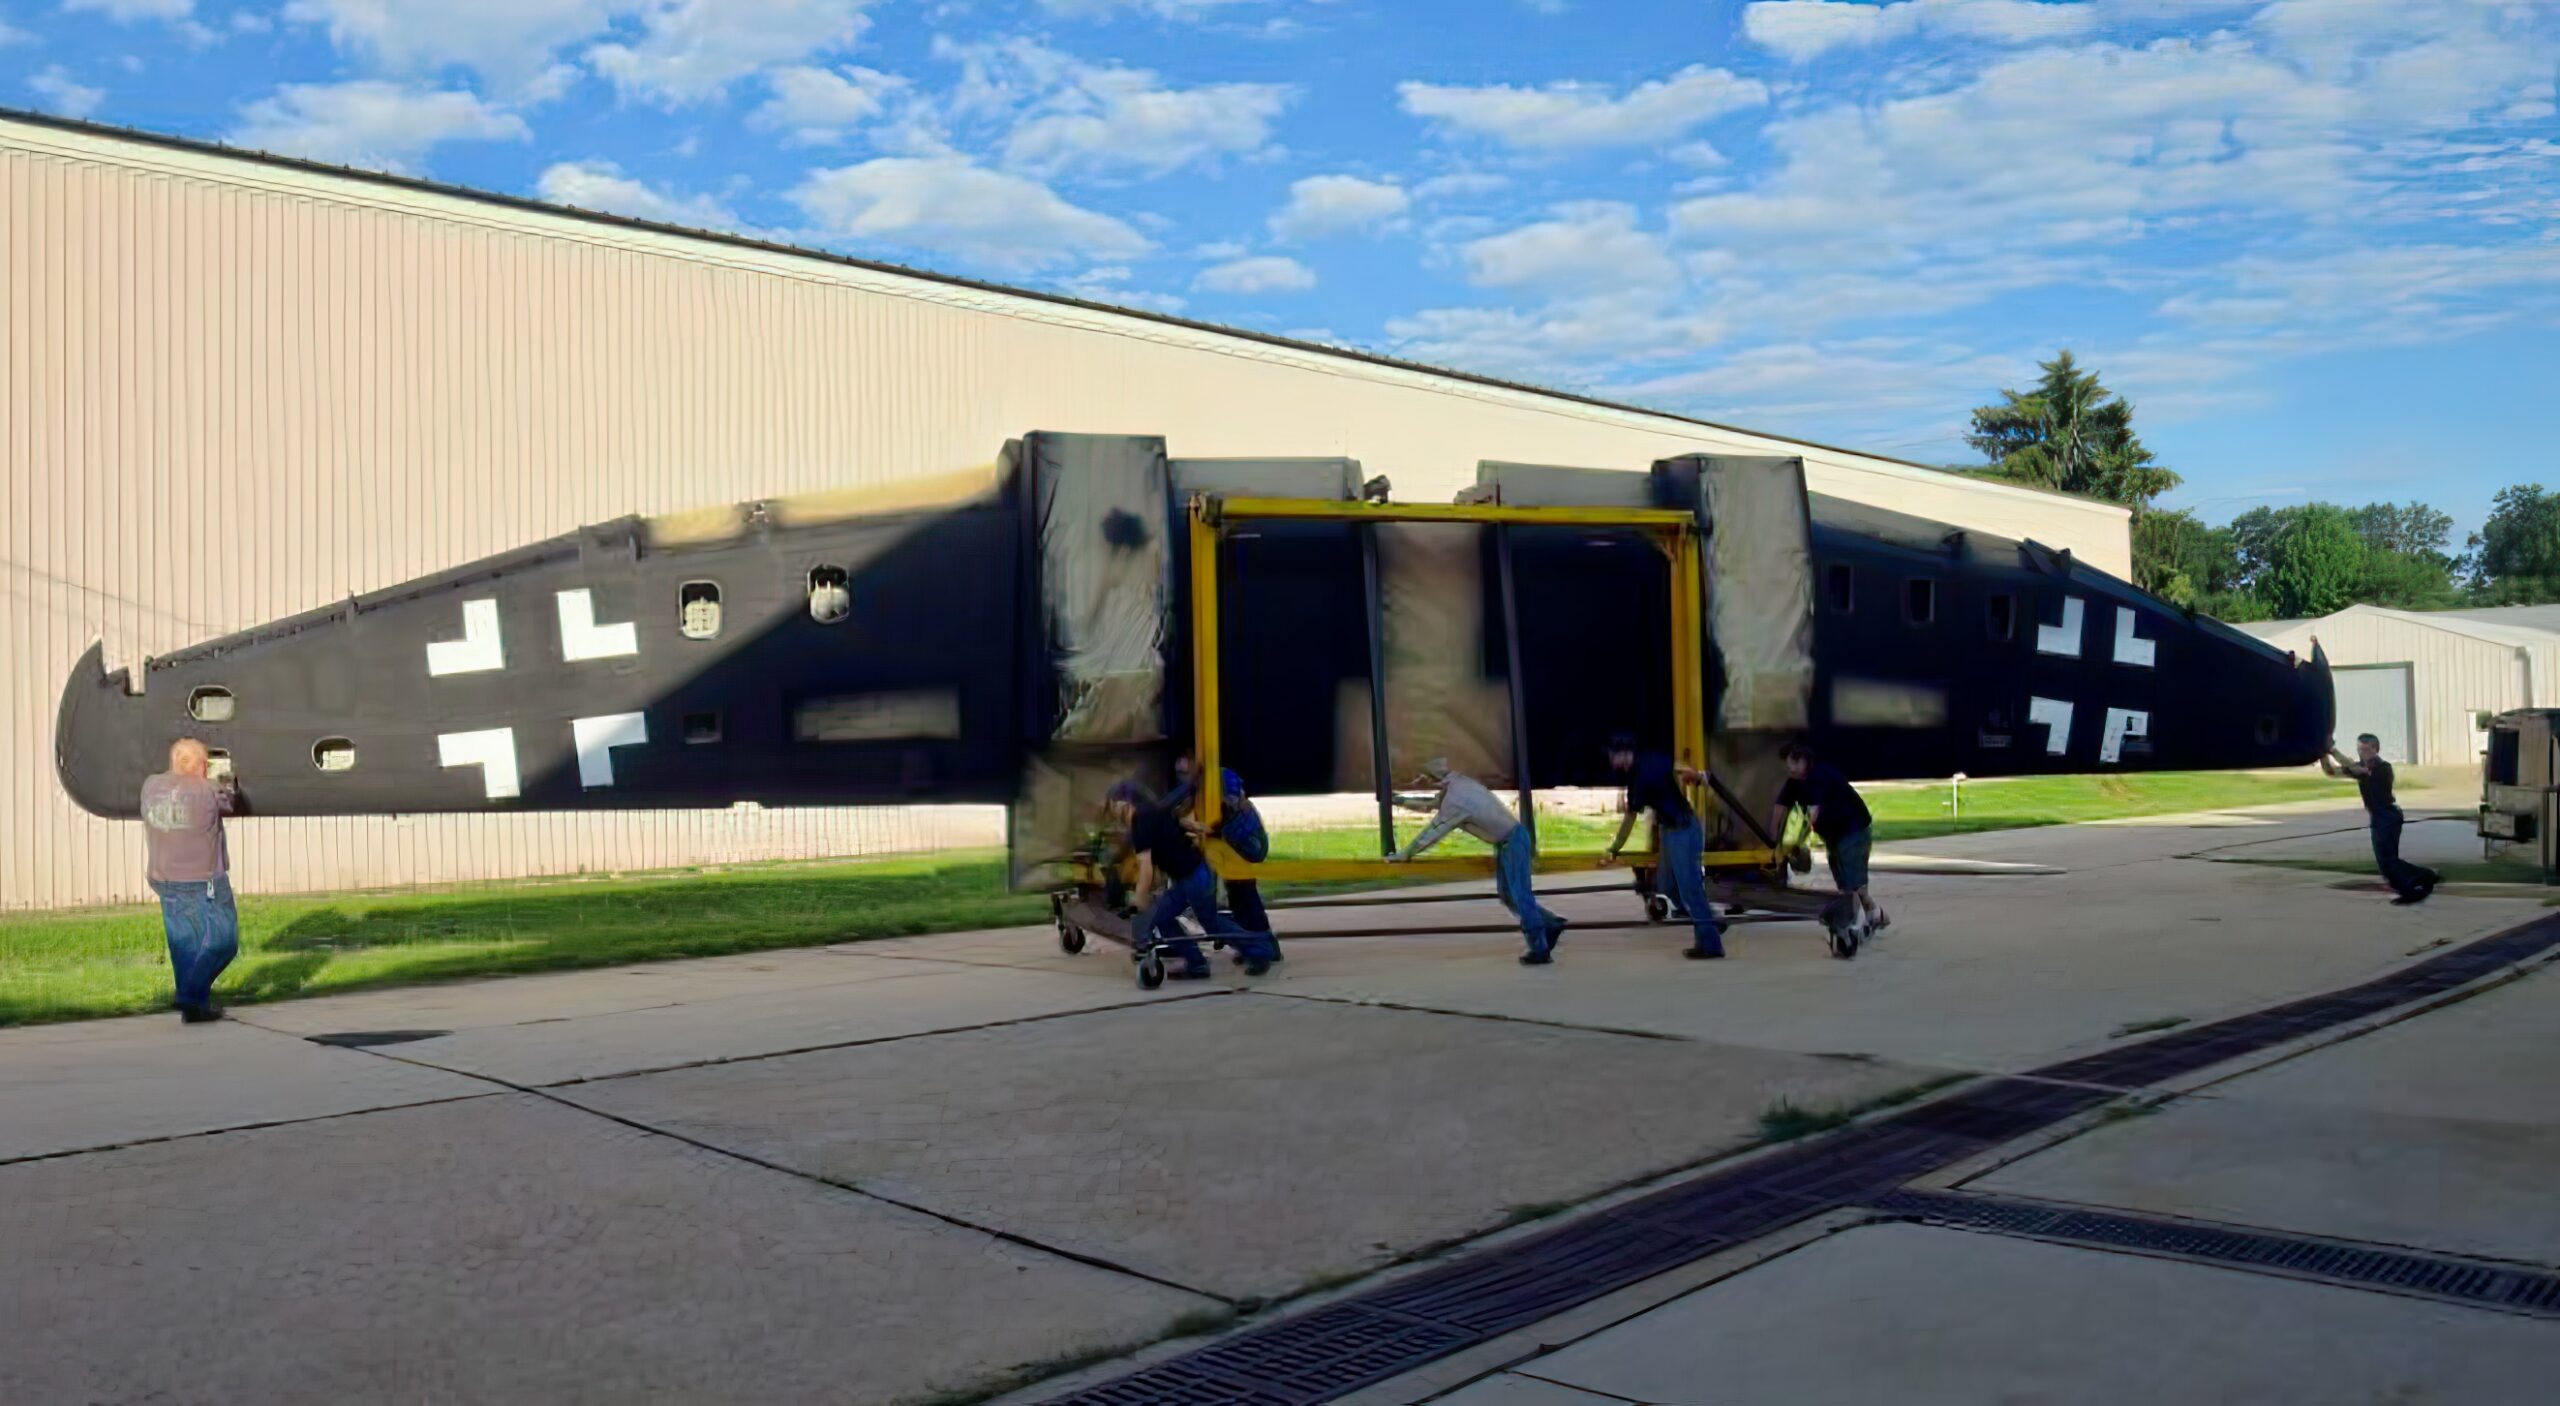 he He 219 wing is rolled out of the paint booth, standing 4 m (13 feet) high and about 19 m (63 feet) long. (photo via NASM)